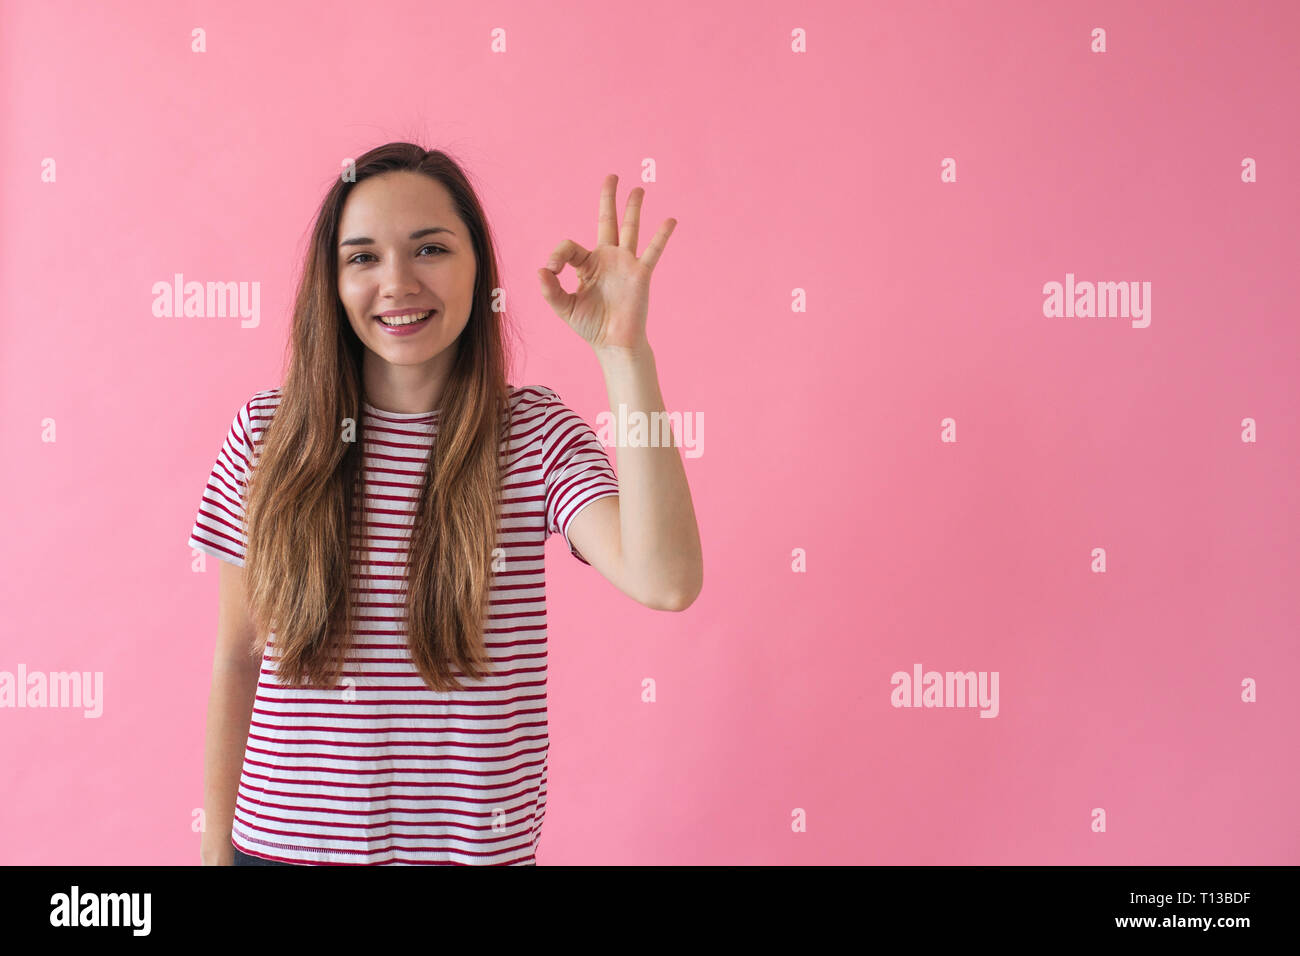 Positive Smiling Girl On A Pink Background Shows Fingers Gesture Meaning Ok Stock Photo Alamy